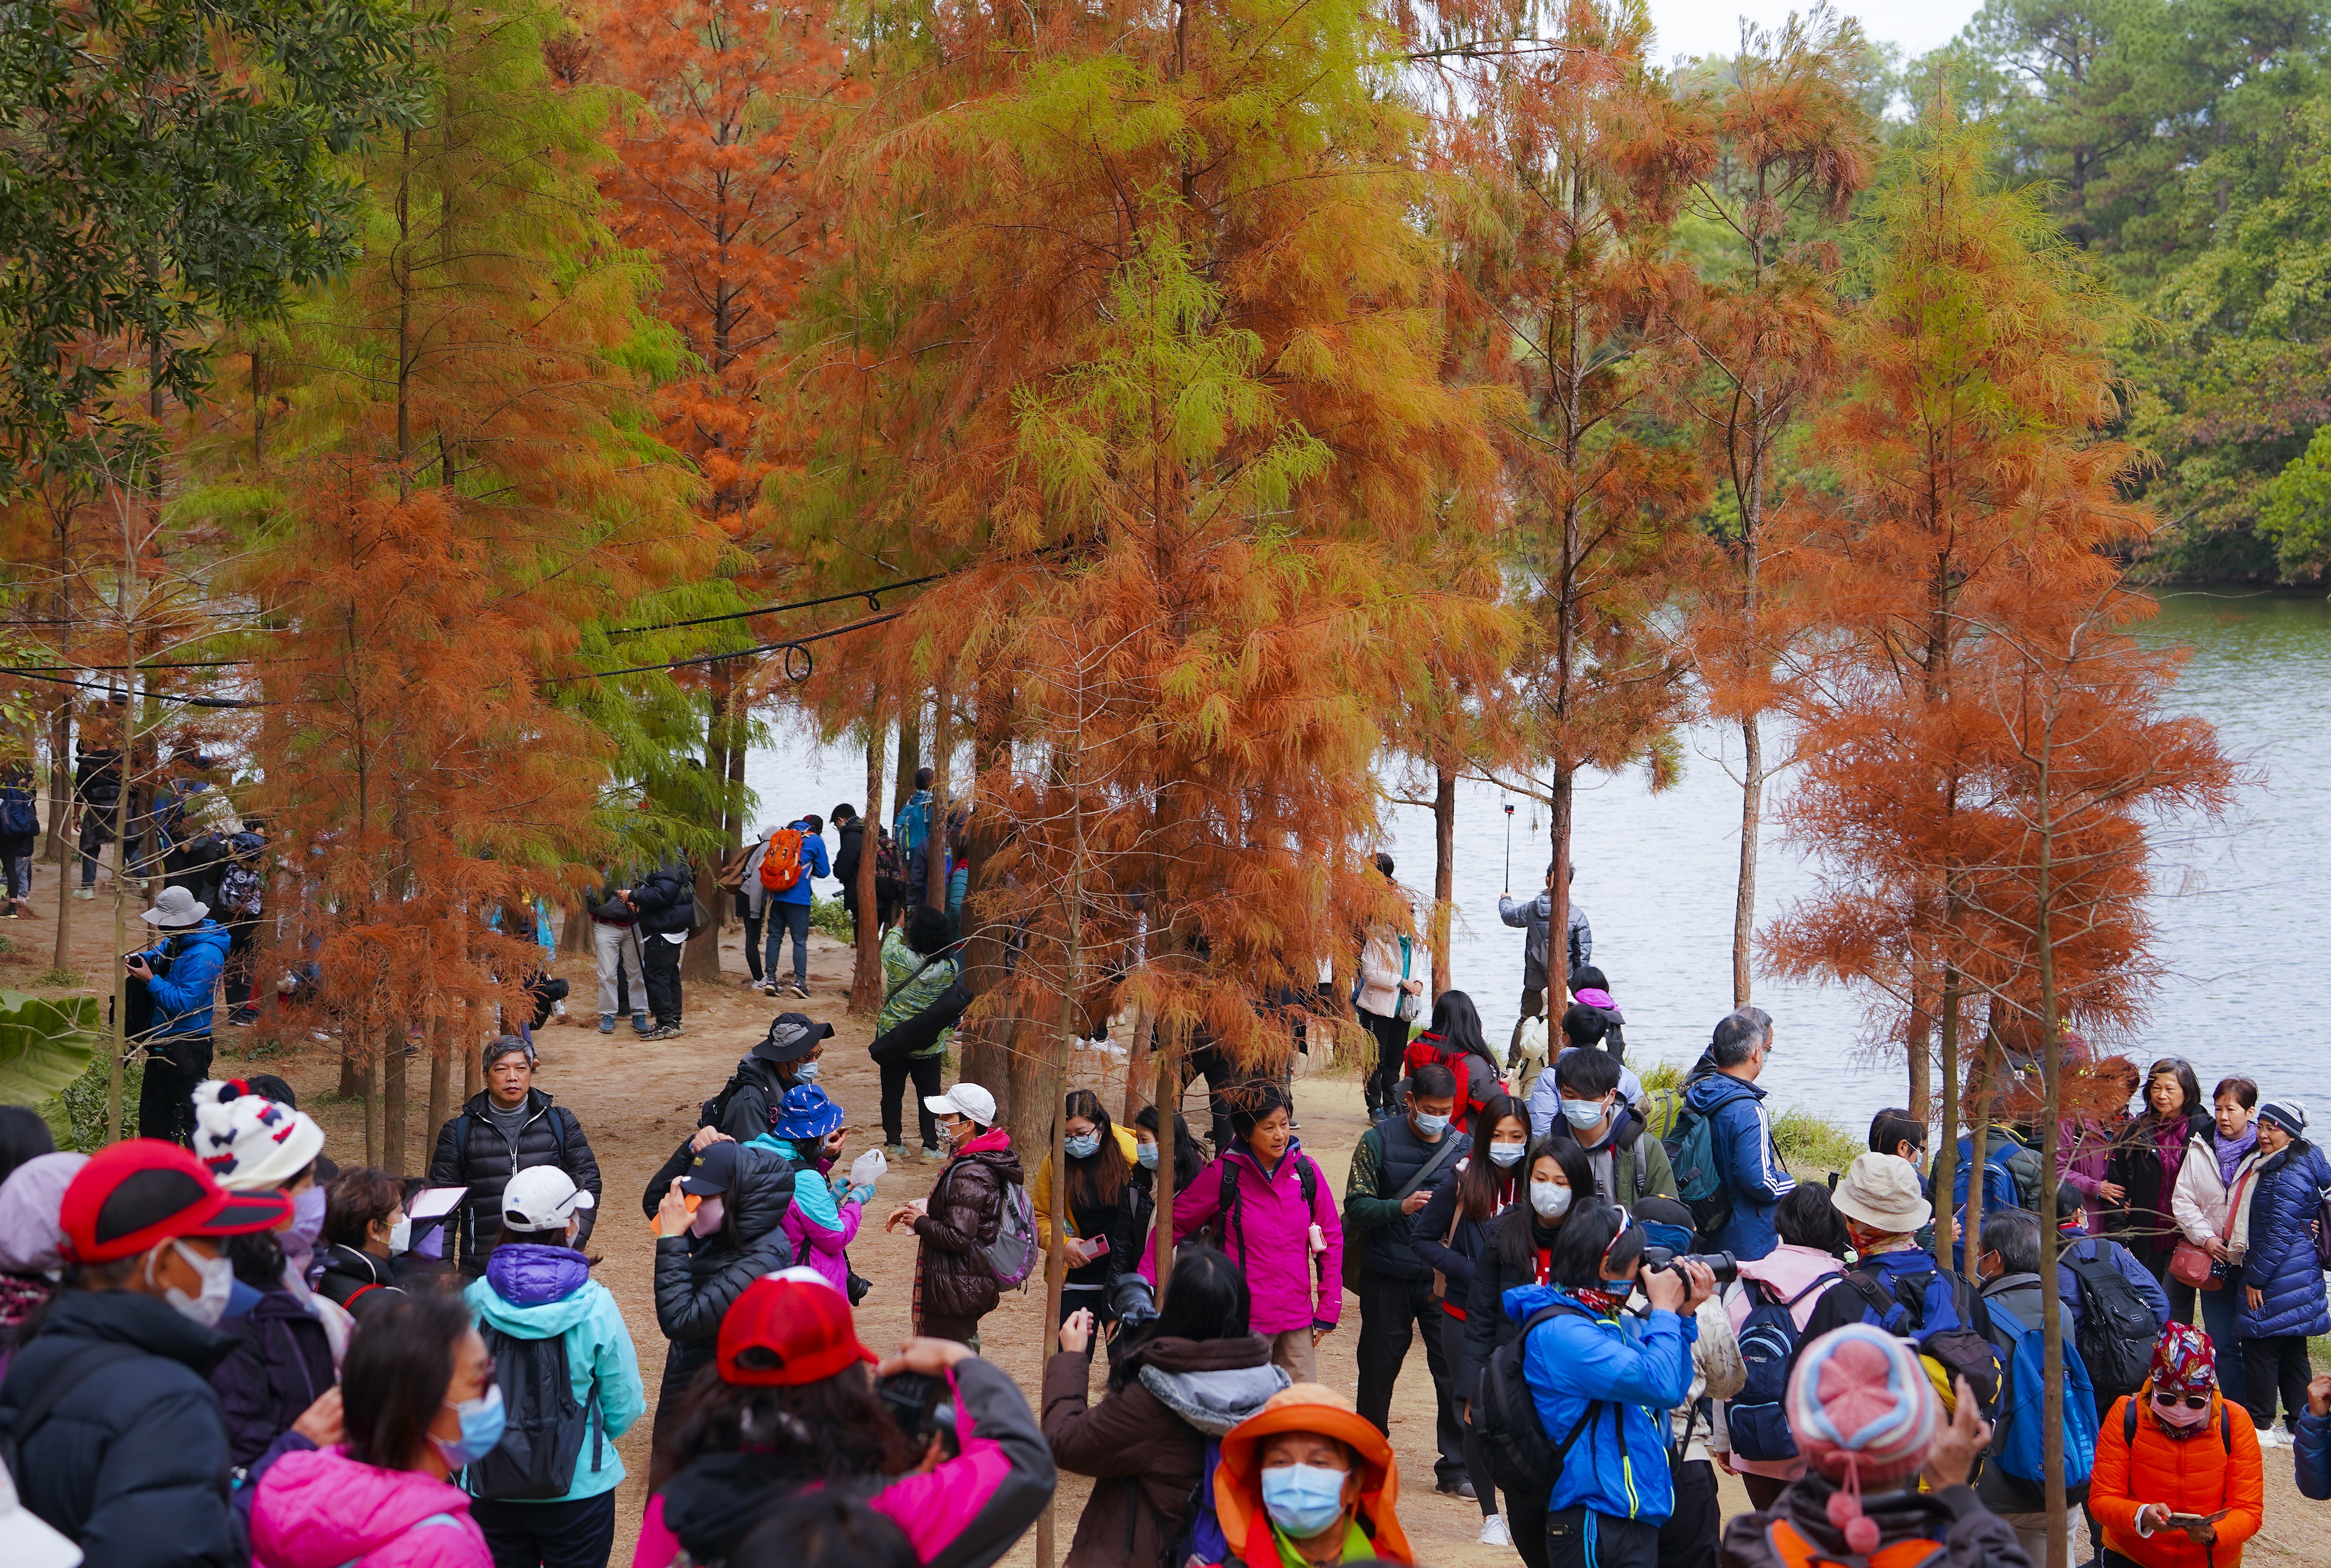 Hikers flocked last week to Lau Shui Heung Reservoir, which sits along one of the city’s most popular trails. Photo: Felix Wong